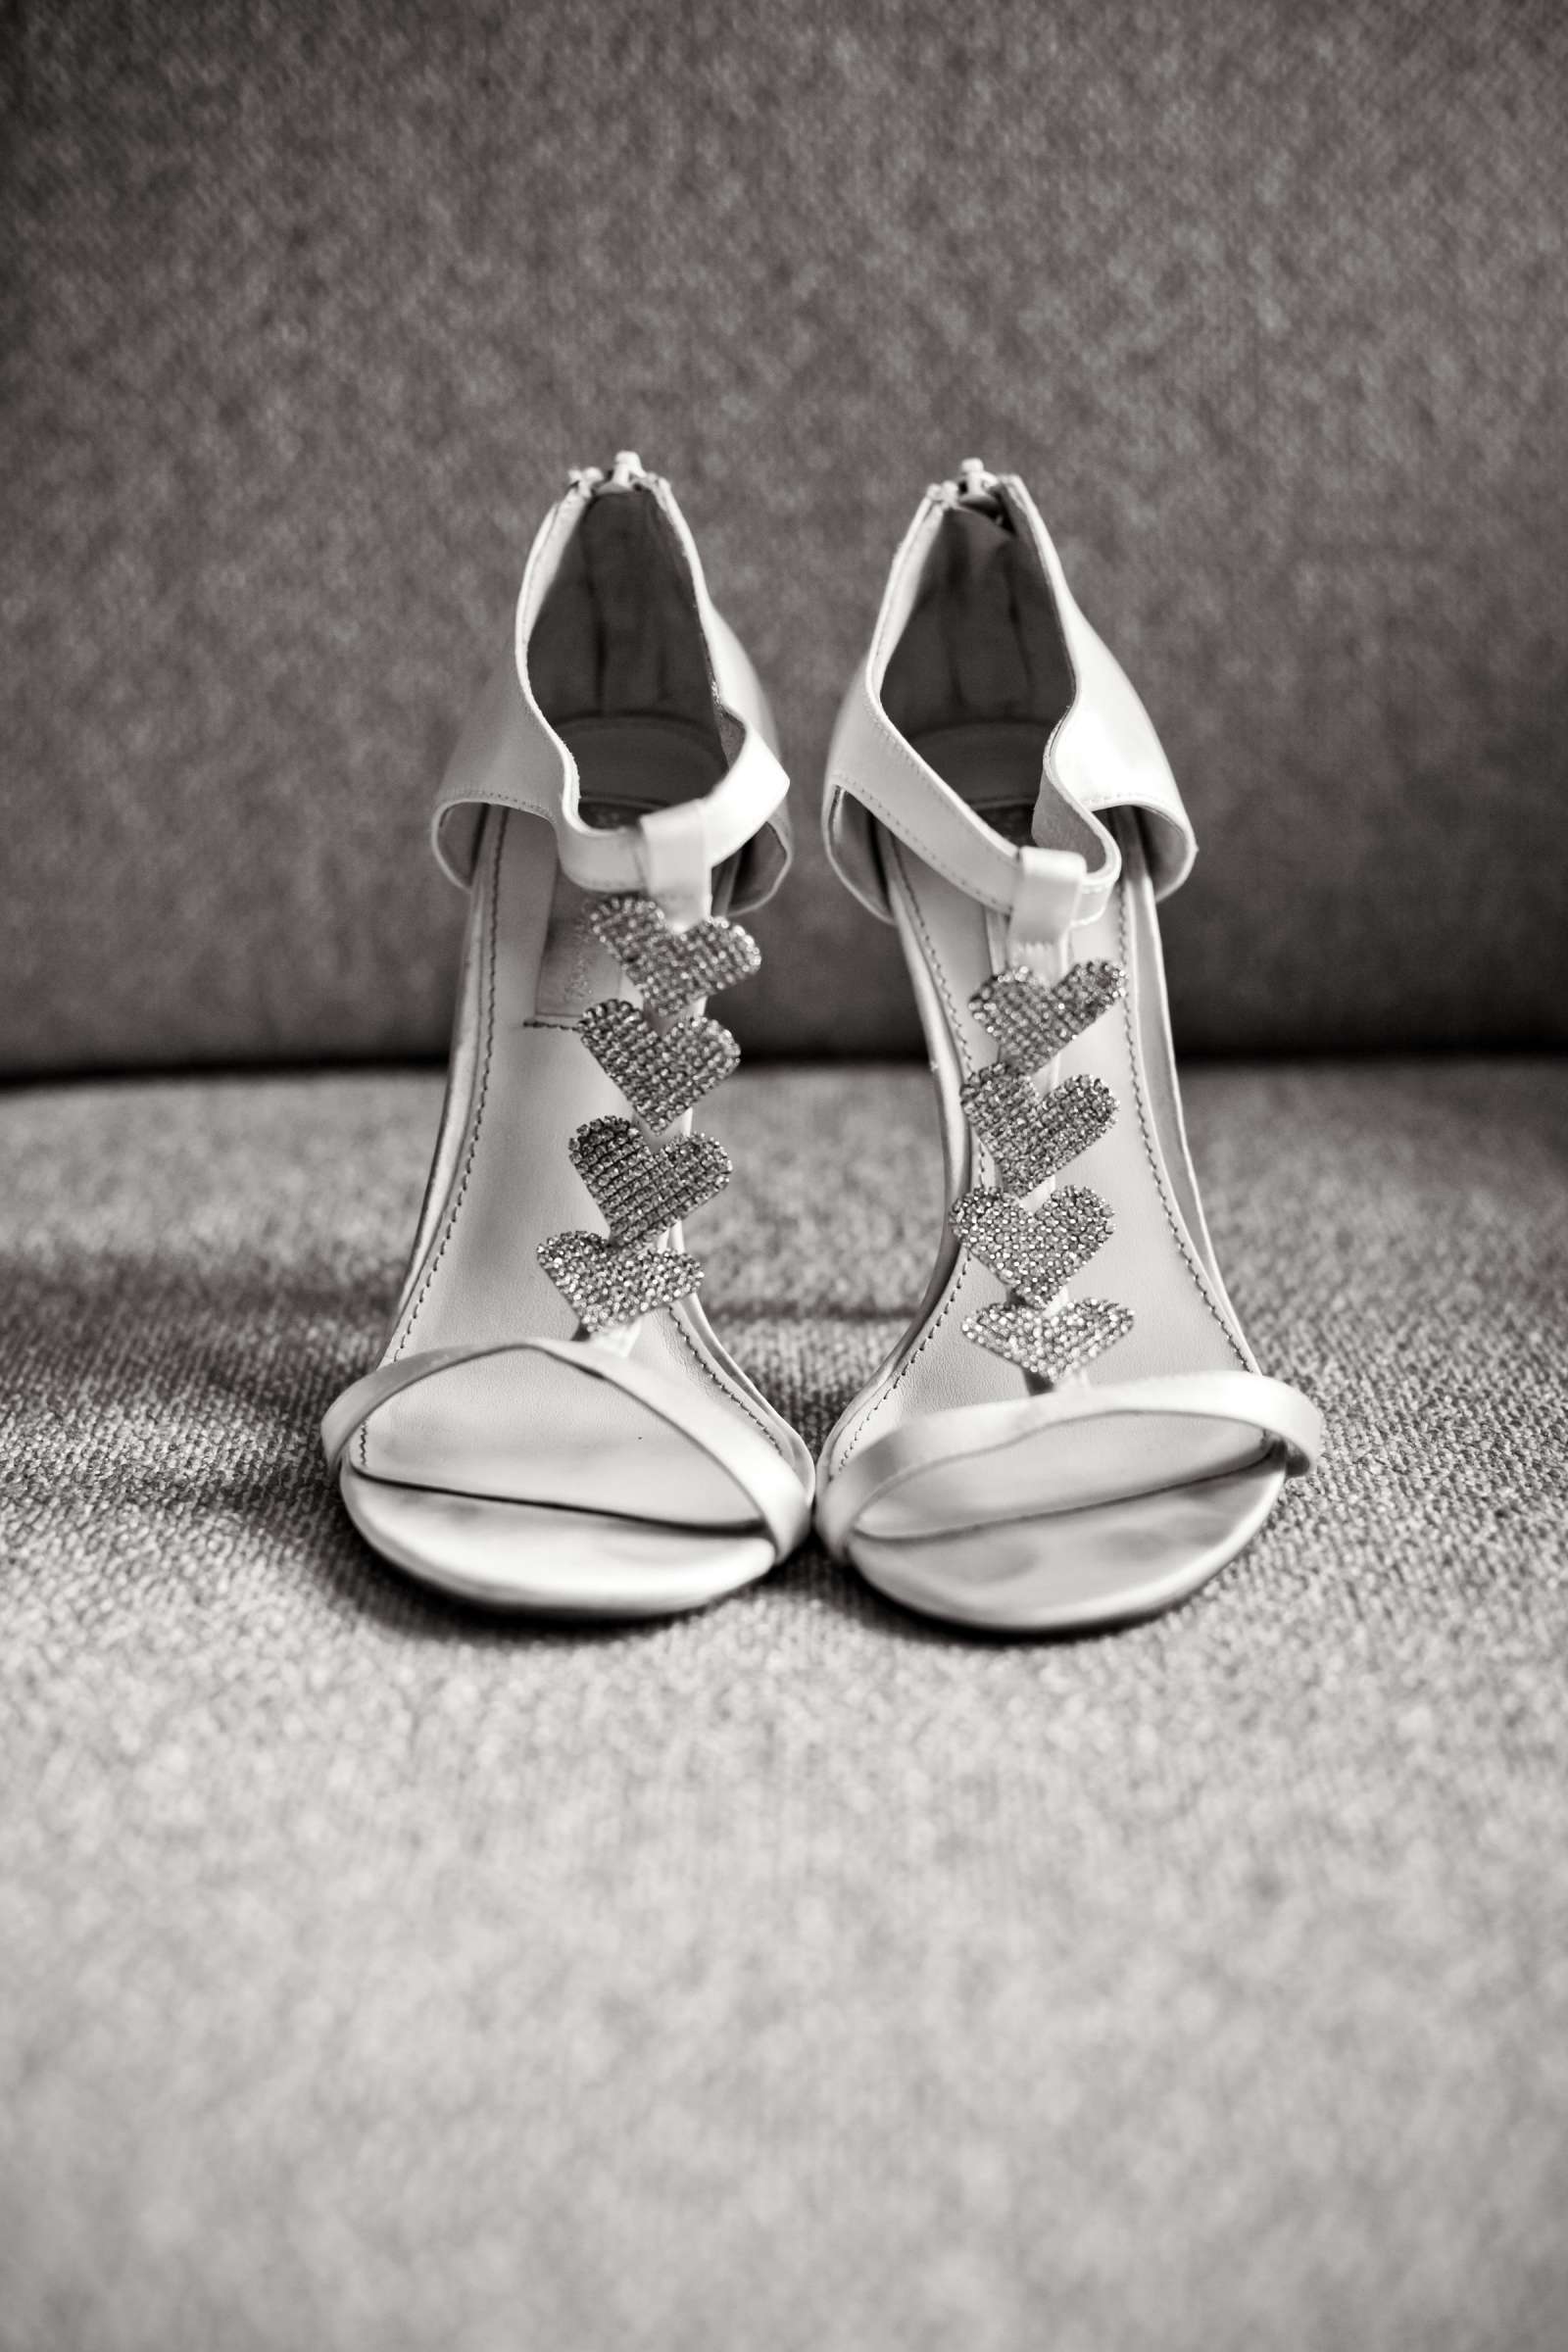 Shoes at Ultimate Skybox Wedding, Dani and Andy Wedding Photo #21 by True Photography